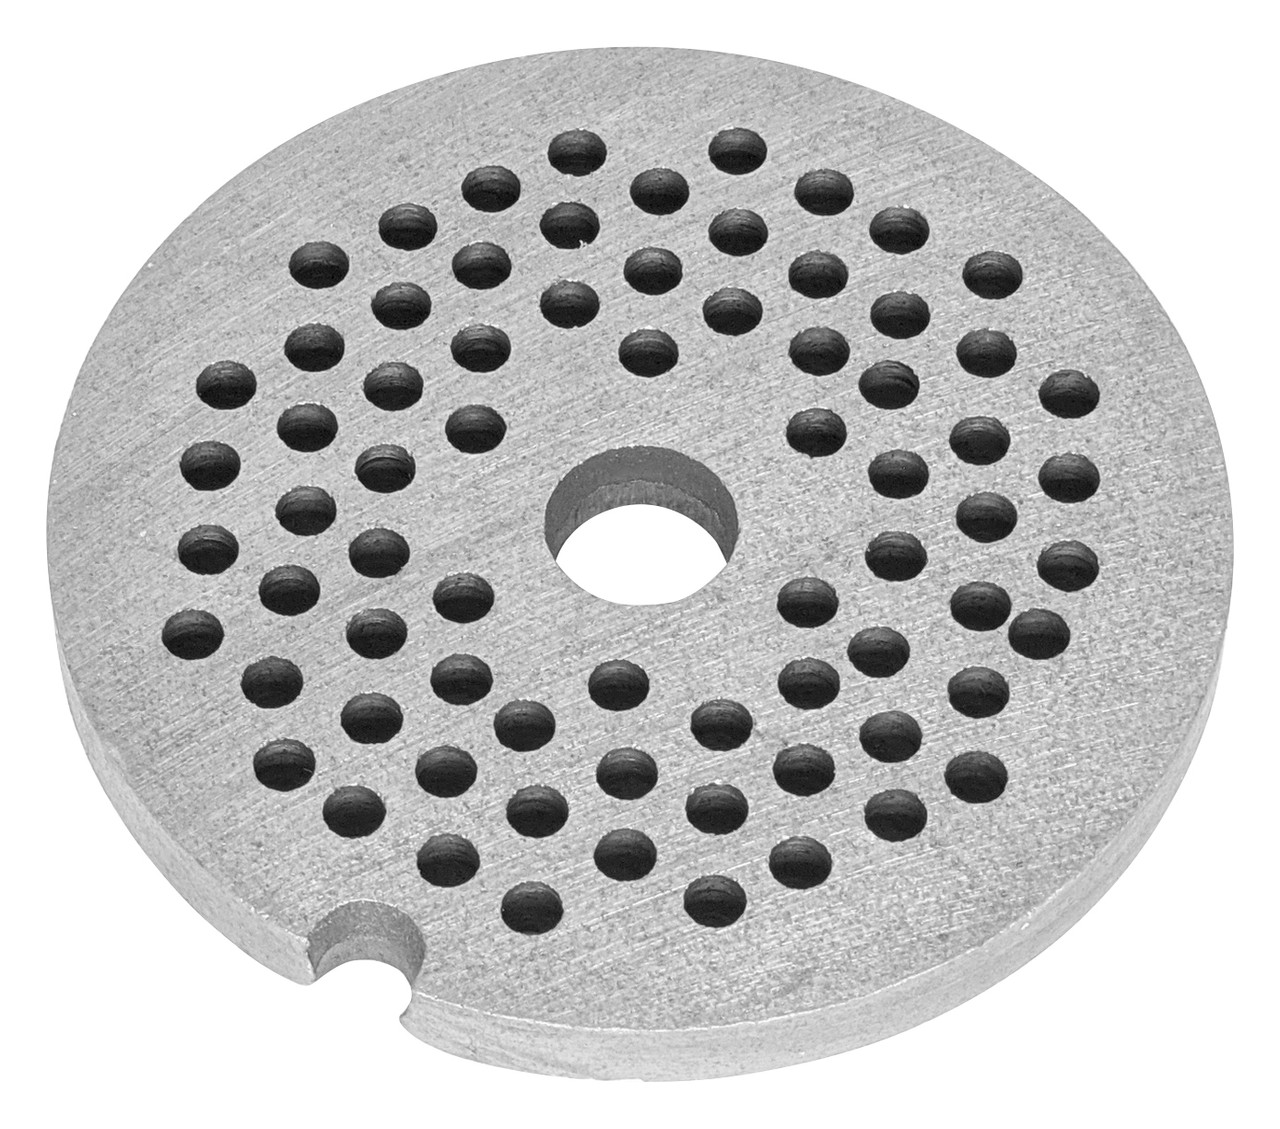 Winco Grinder Plate for MG-10, #10, 1/8" (3mm), Iron